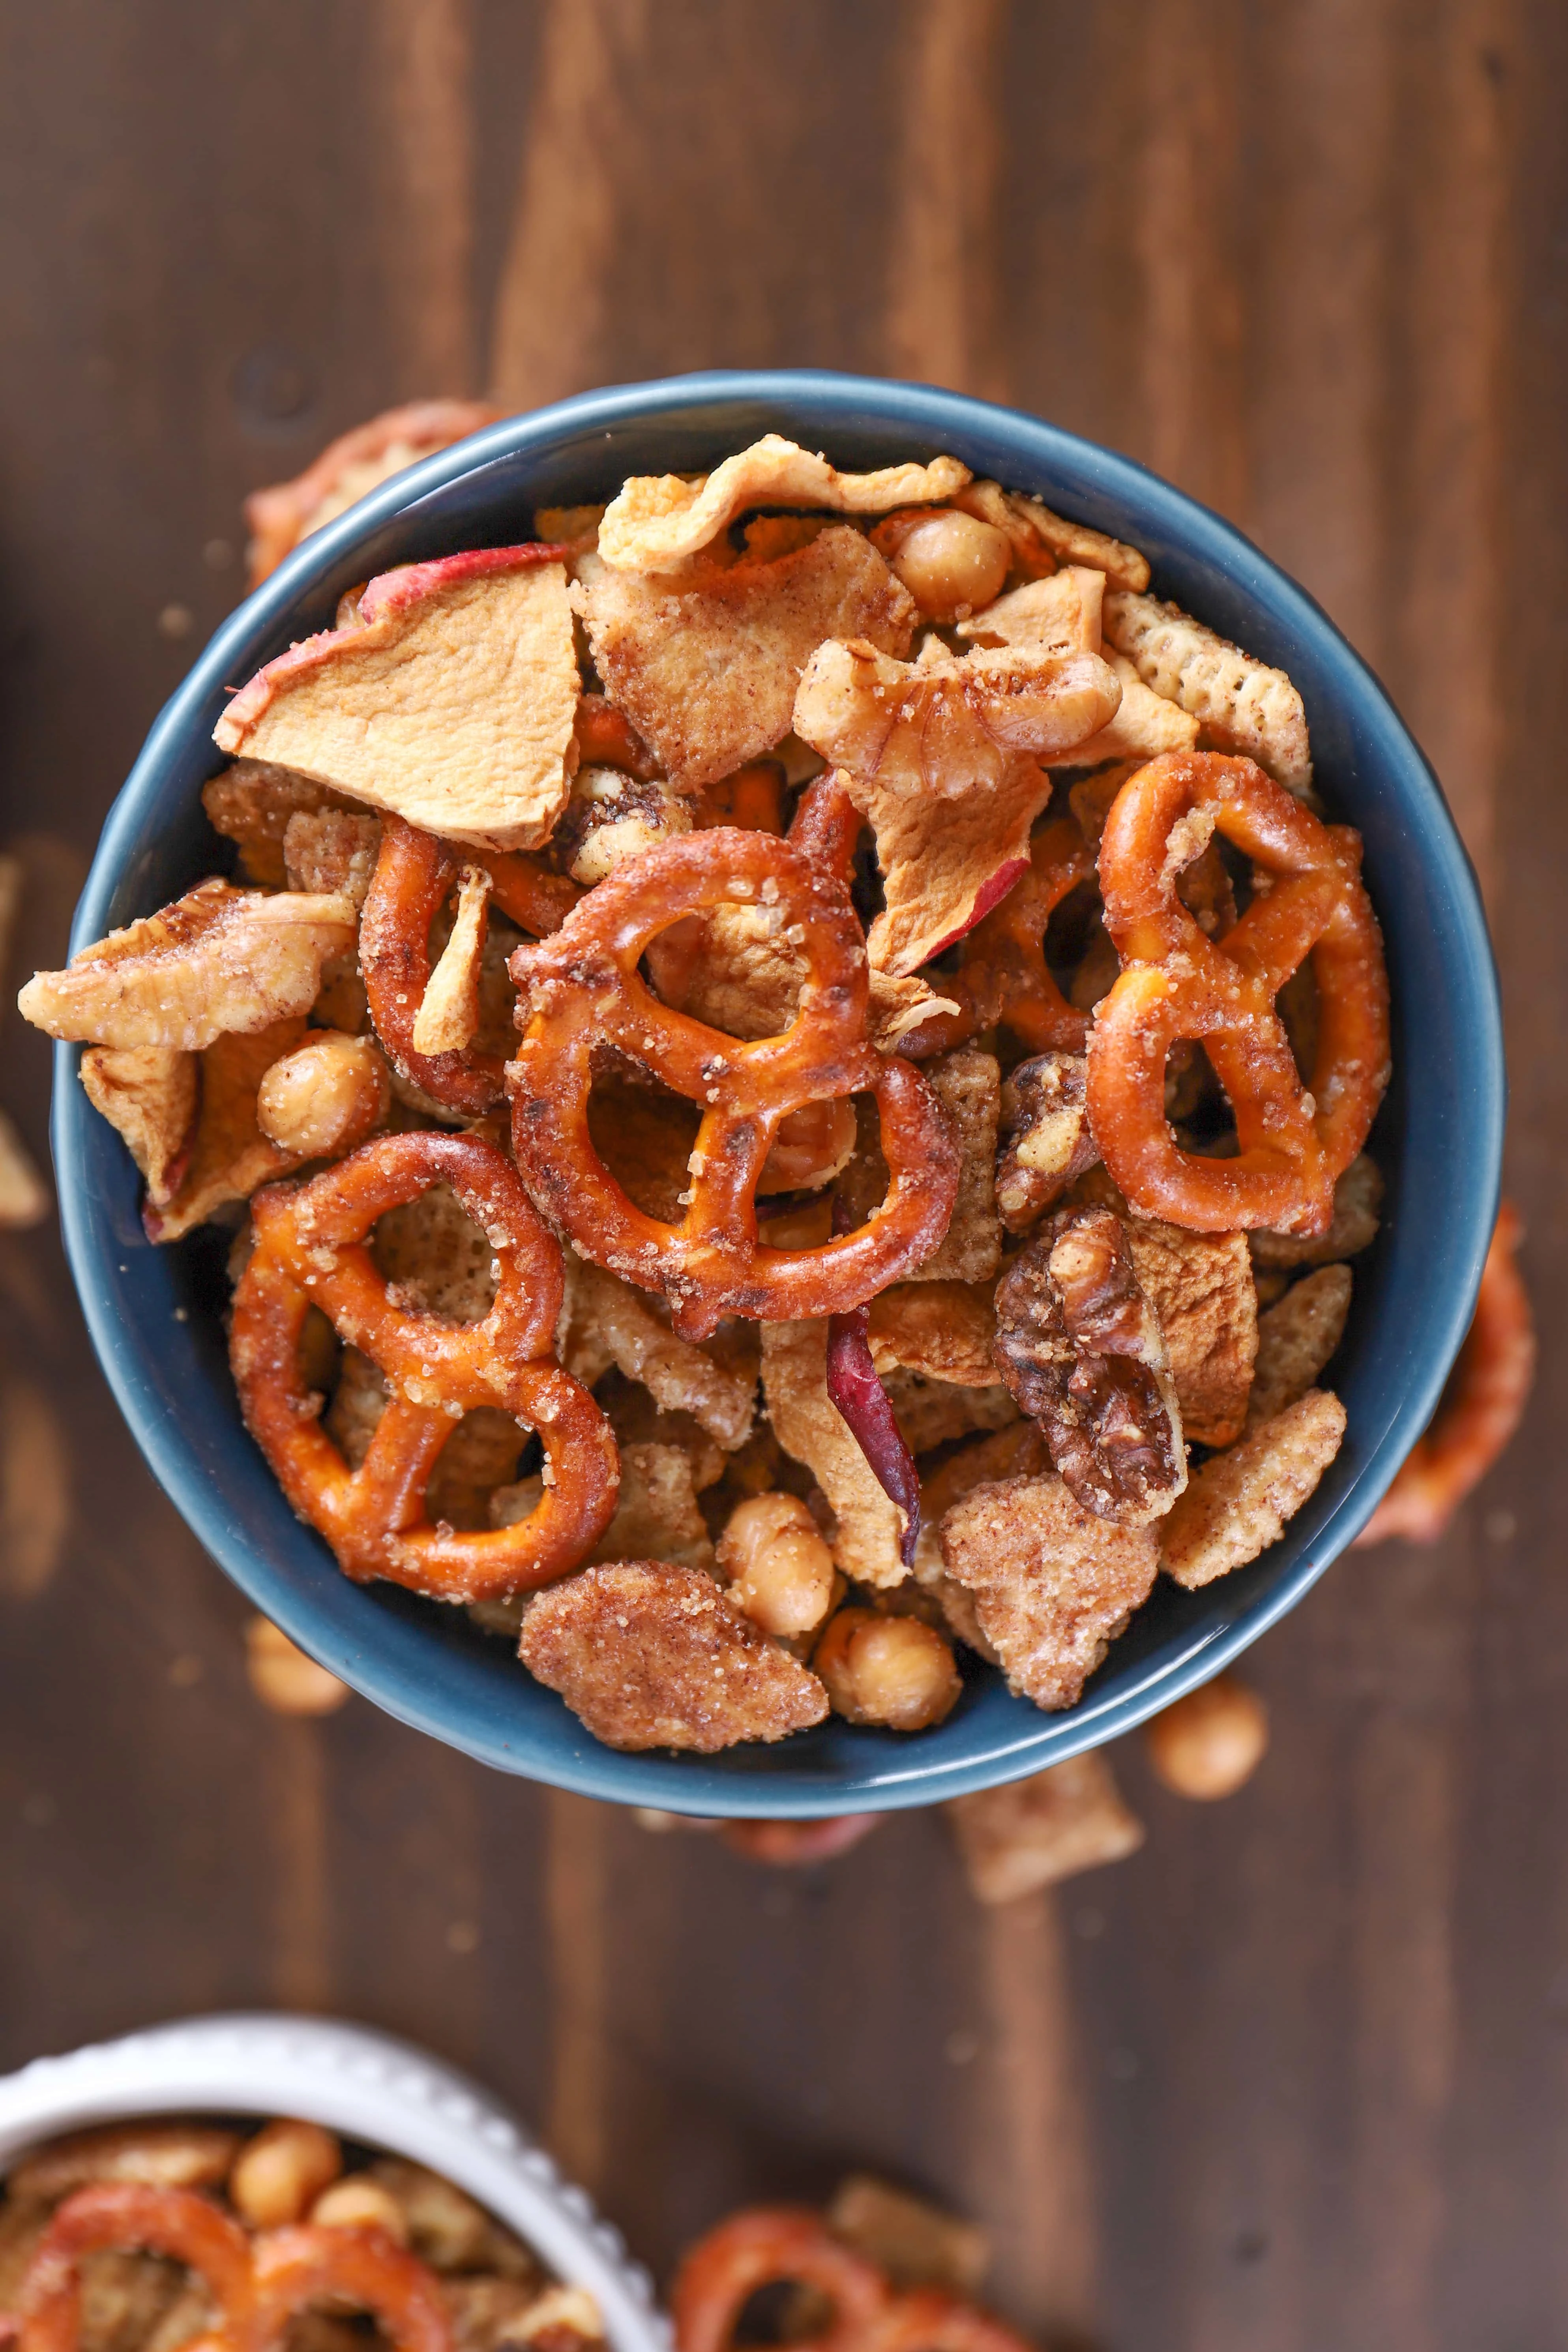 Slow Cooker Caramel Apple Spice Snack Mix Recipe